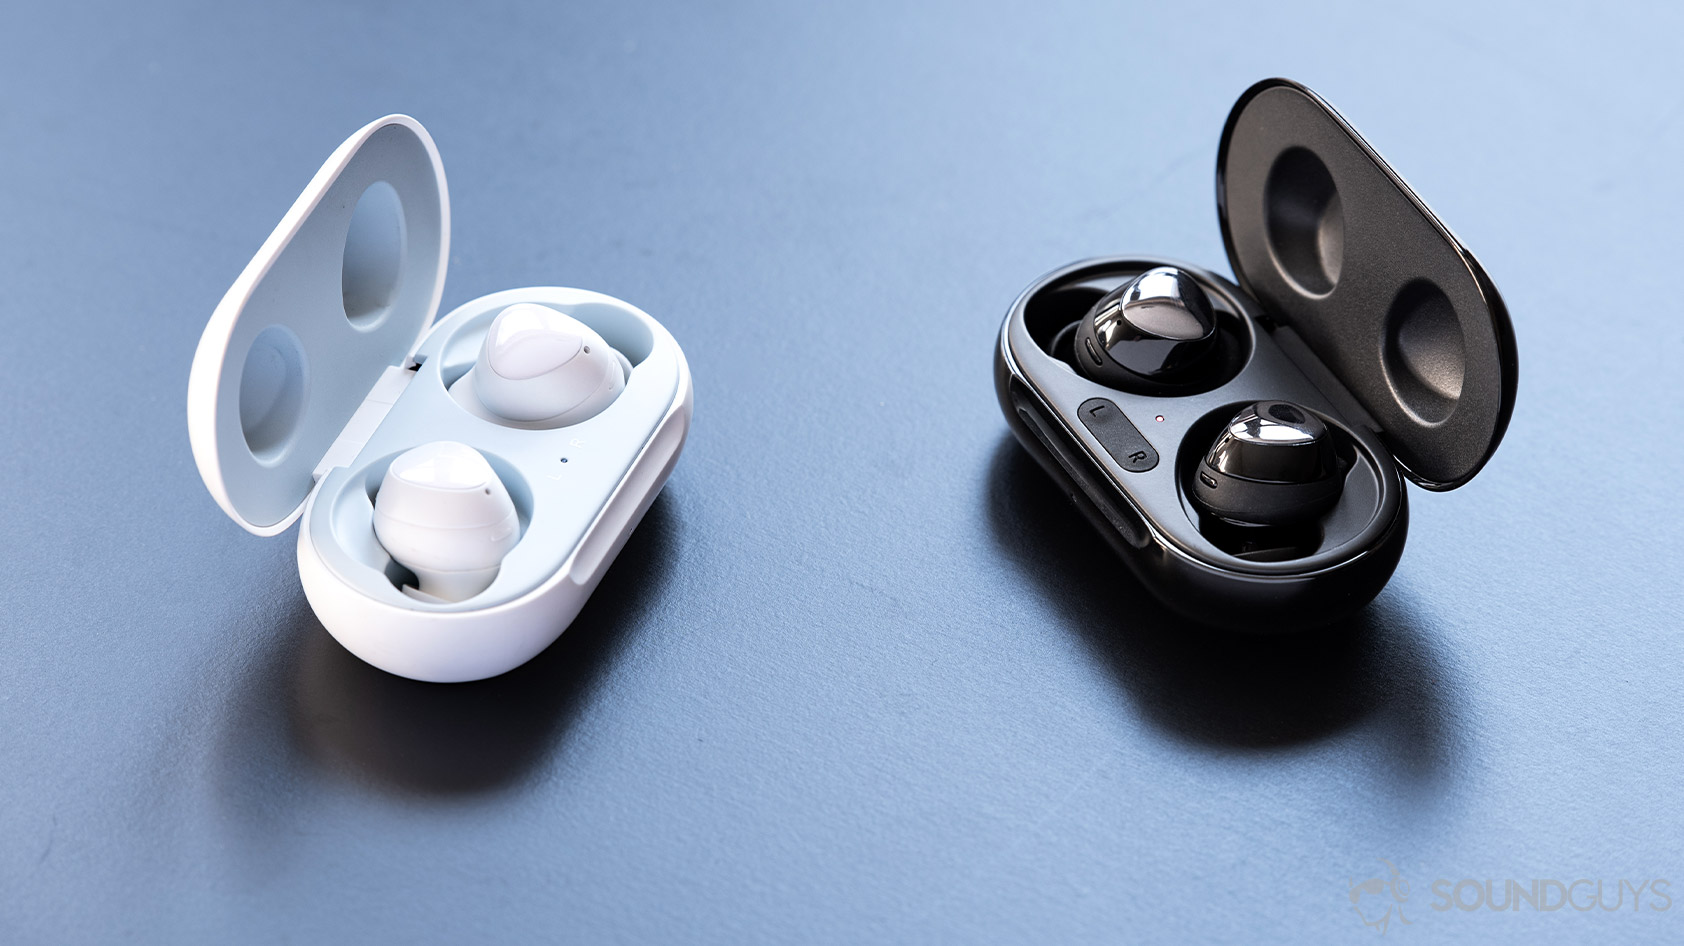 A comparison/versus picture of the Samsung Galaxy Buds Plus and Galaxy Buds in their respective cases, angled toward each other.